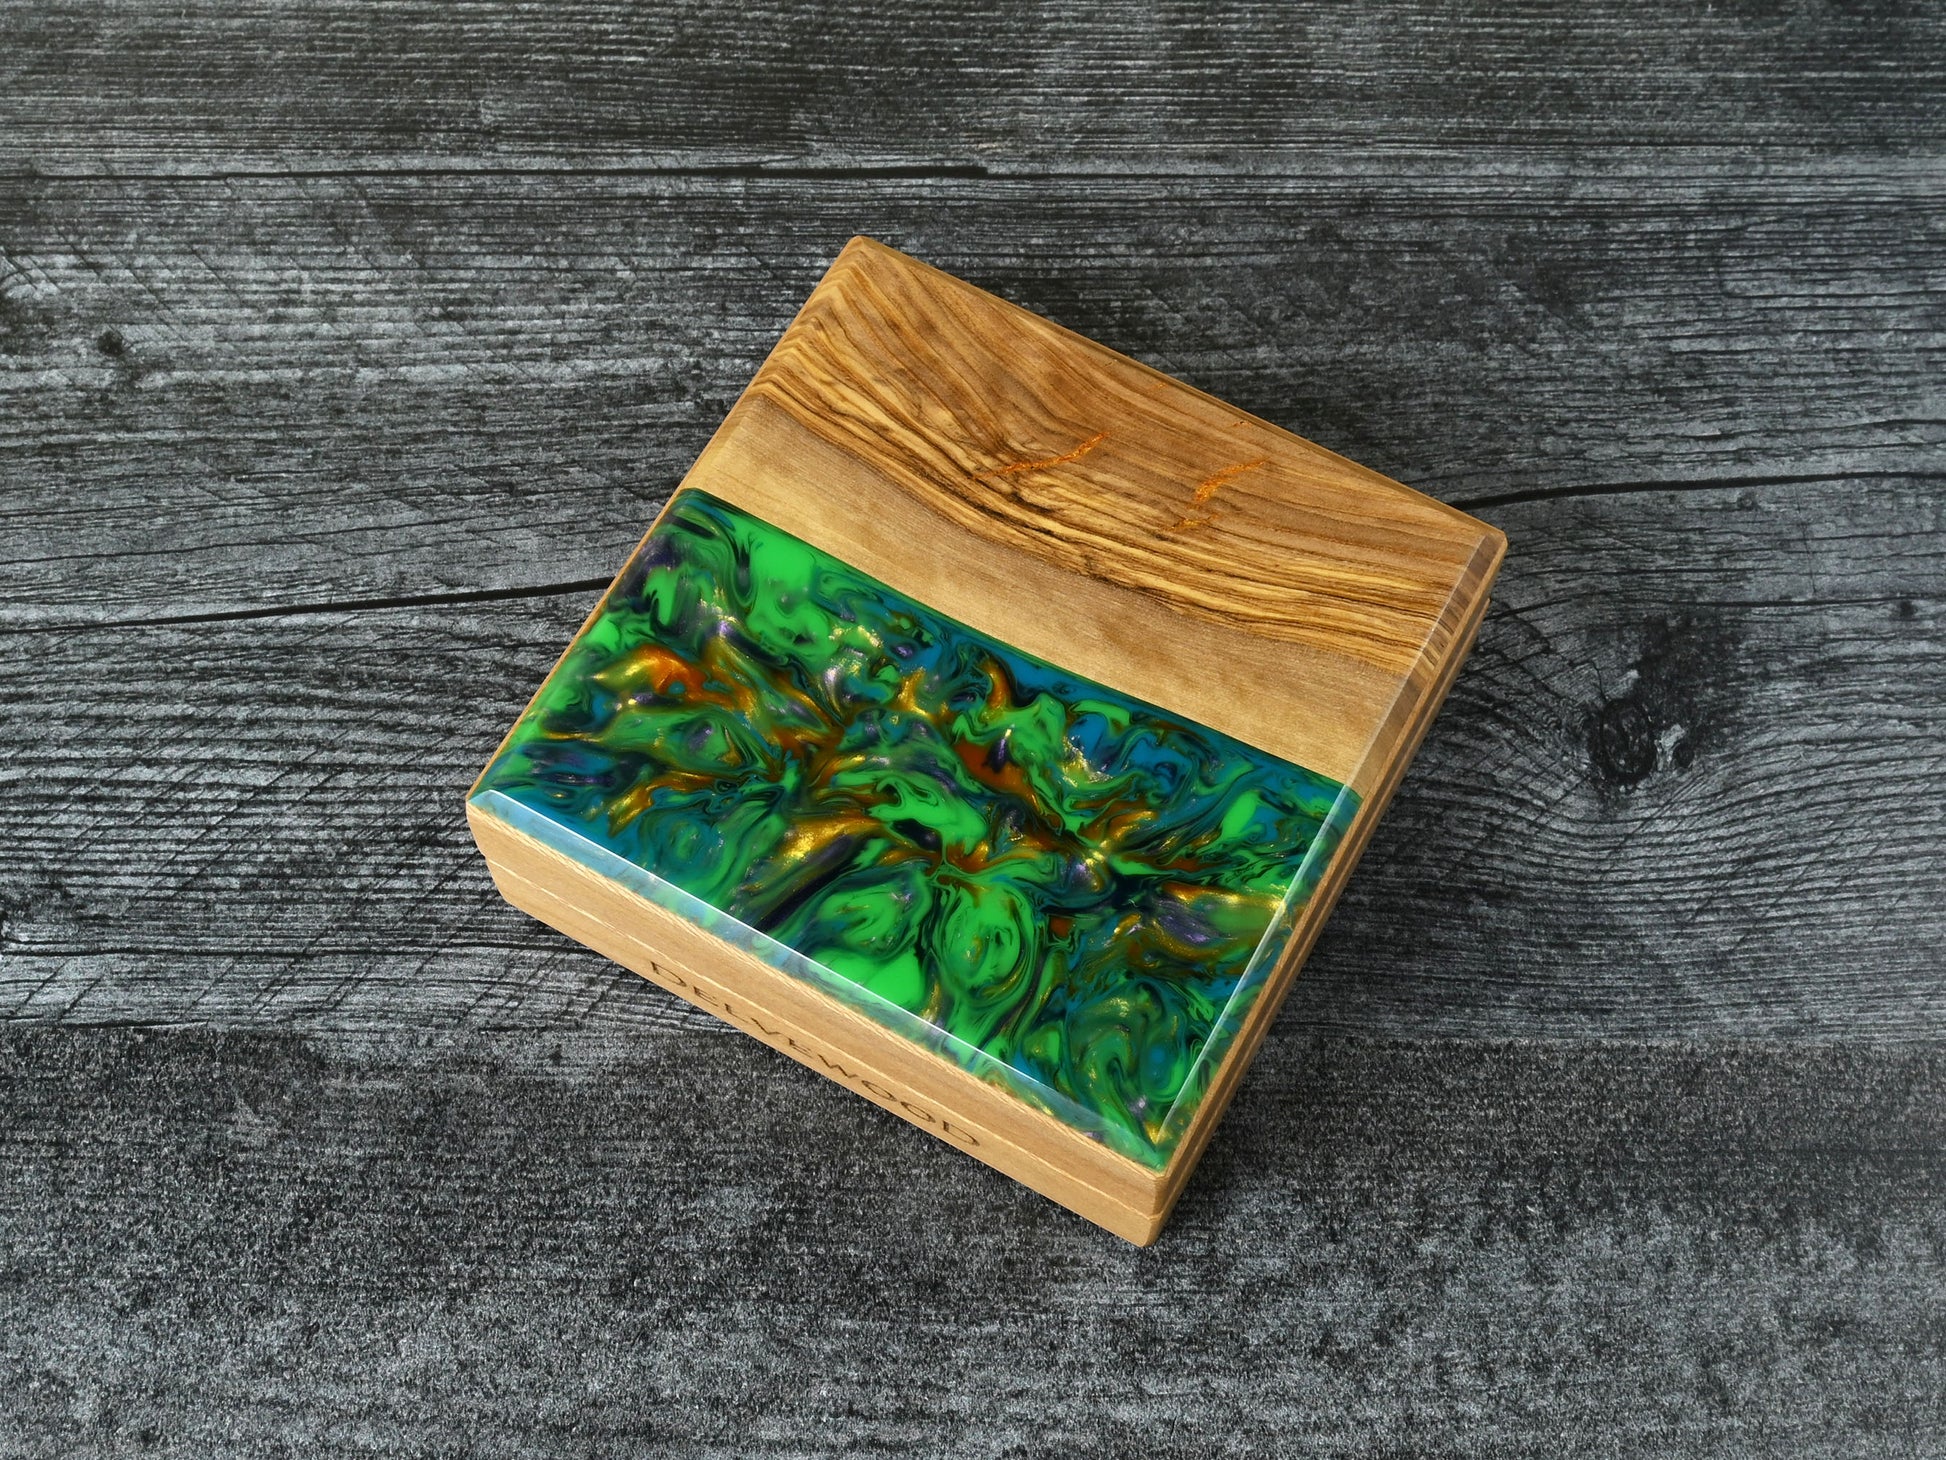 This Little Delver Dice Box features a sycamore wood core and an olivewood top veneer with green, turquoise, purple, and gold resin. D&D ttrpg.